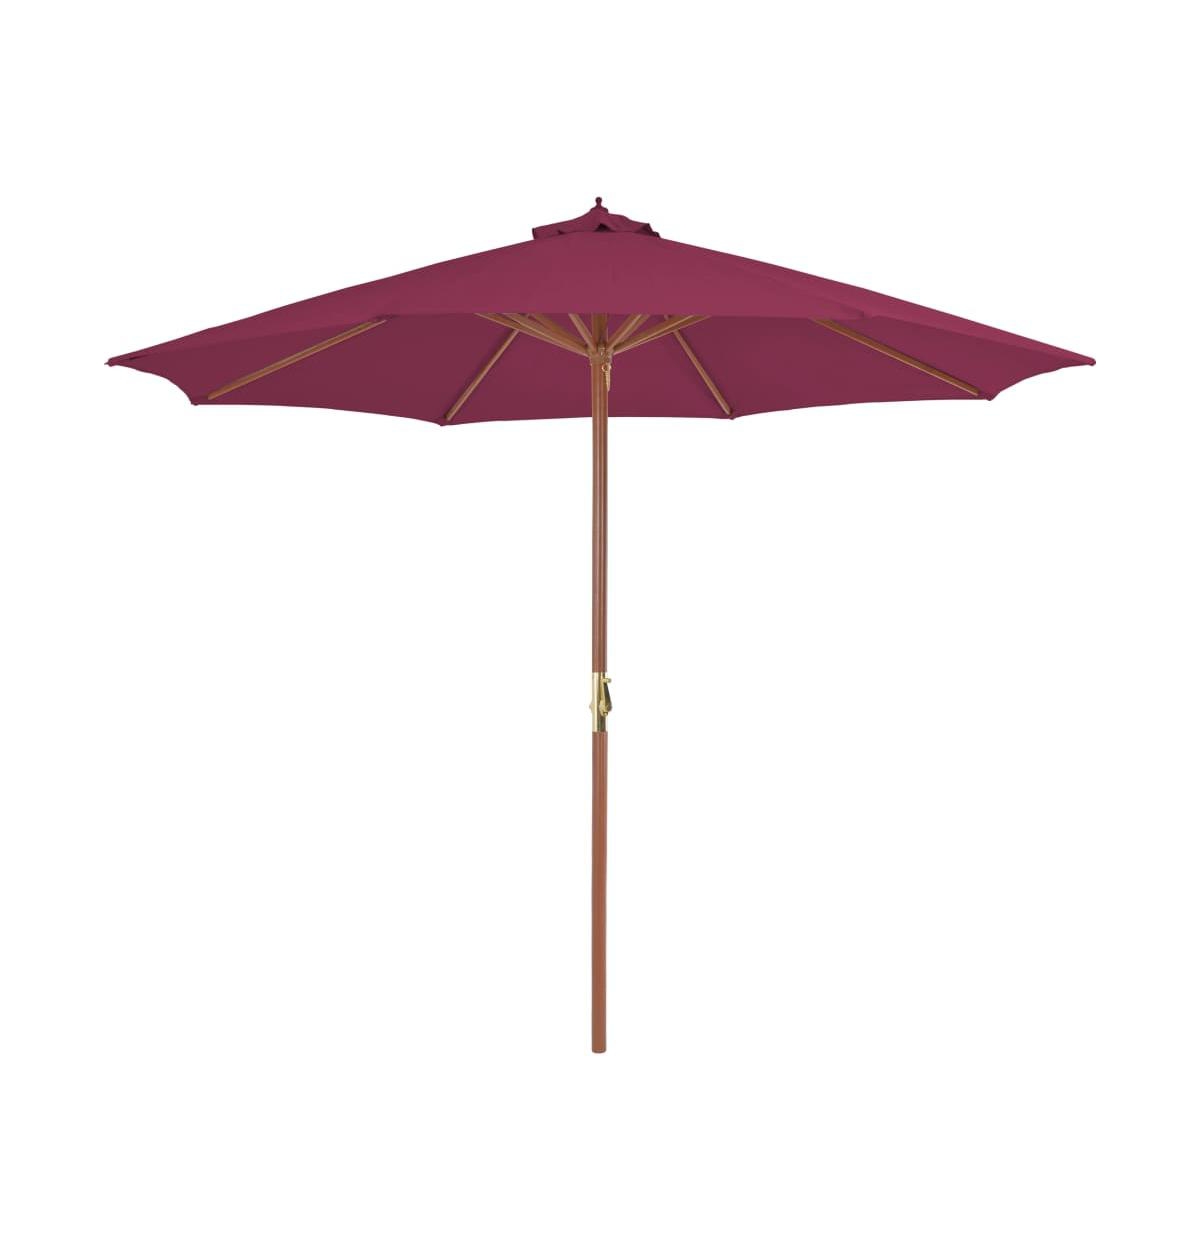 Outdoor Parasol with Wooden Pole 118.1" Bordeaux Red - Red